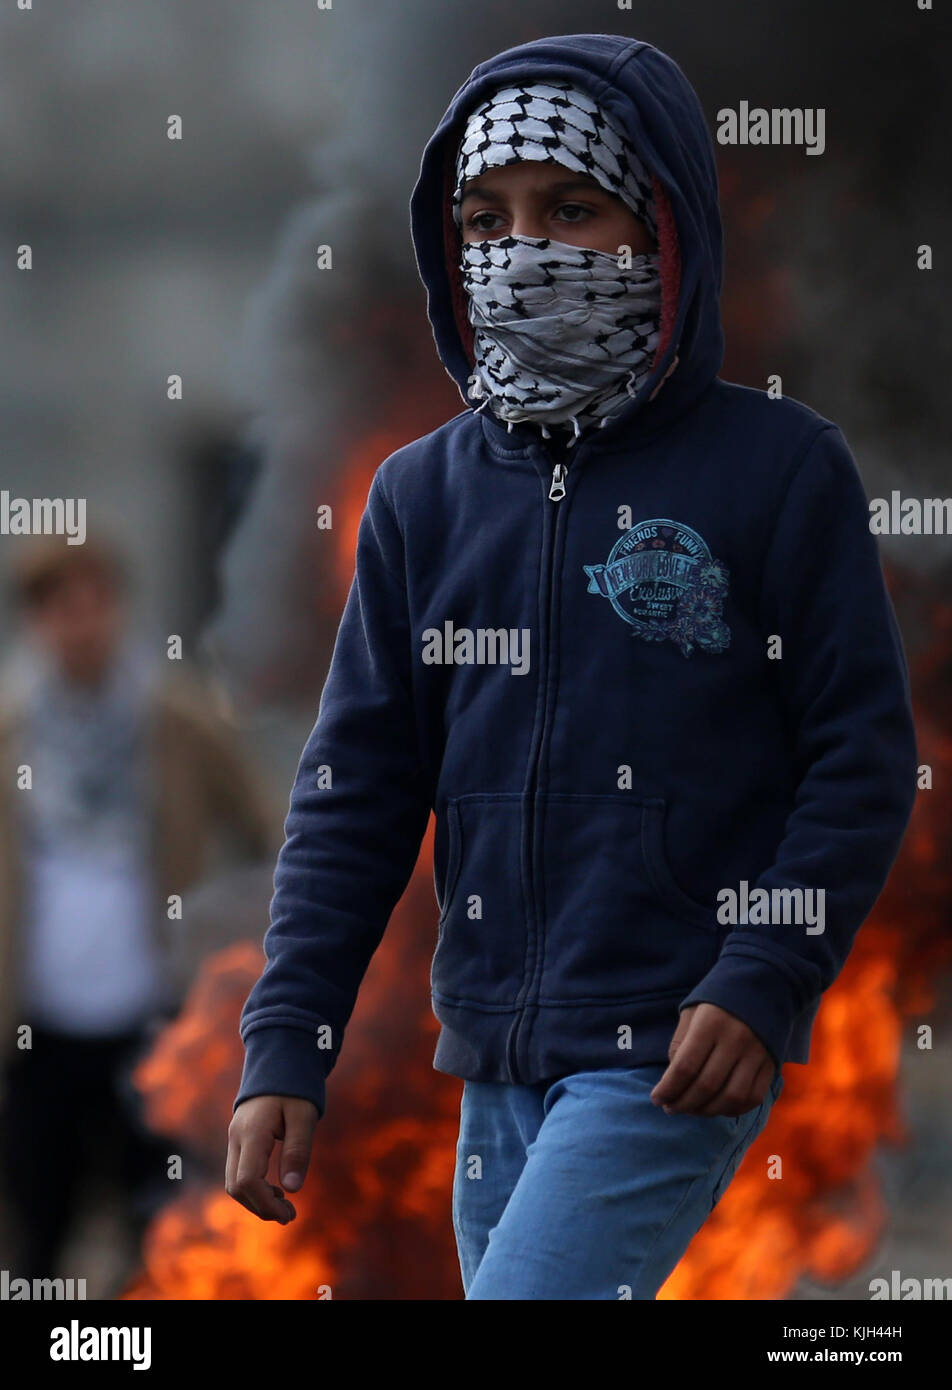 Nablus, West Bank, Palestinian Territory. 24th Nov, 2017. A Palestinian protester looks on during clashes with Israeli security forces following a weekly demonstration against the expropriation of Palestinian land by Israel in the village of Kfar Qaddum, near Nablus in the occupied West Bank, on November 24, 2017 Credit: Shadi Jarar'Ah/APA Images/ZUMA Wire/Alamy Live News Stock Photo